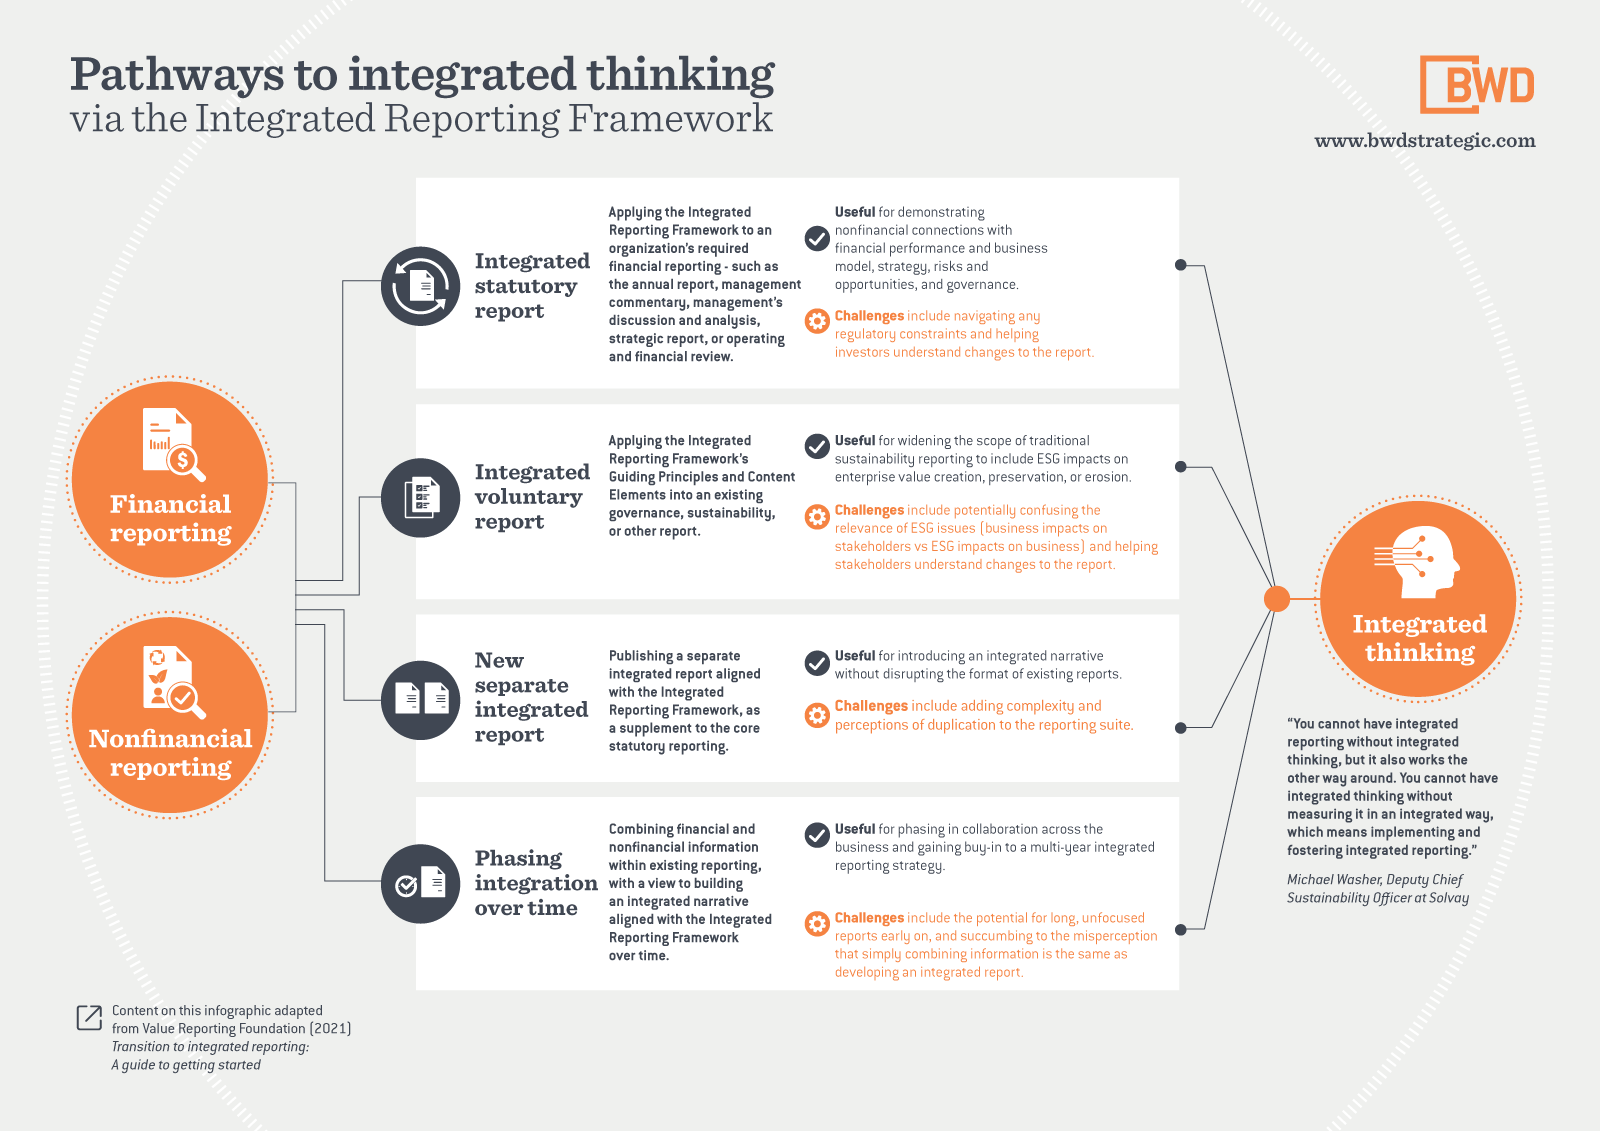 BWD_infographic_Pathways-to-integrated-thinking@2x